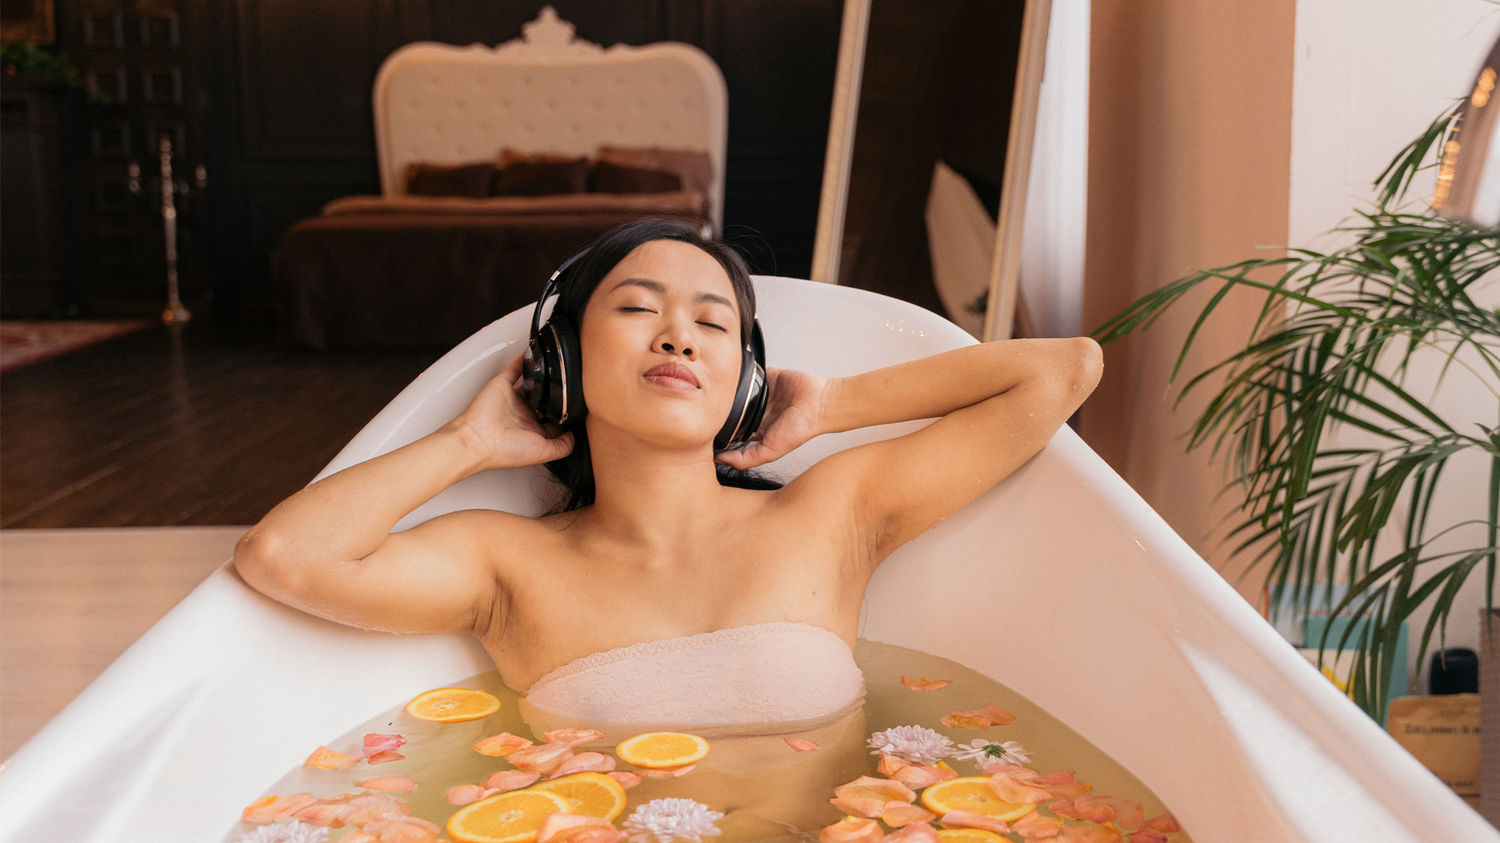 Creative Bath Time: Rejuvenate Your Body and Mind